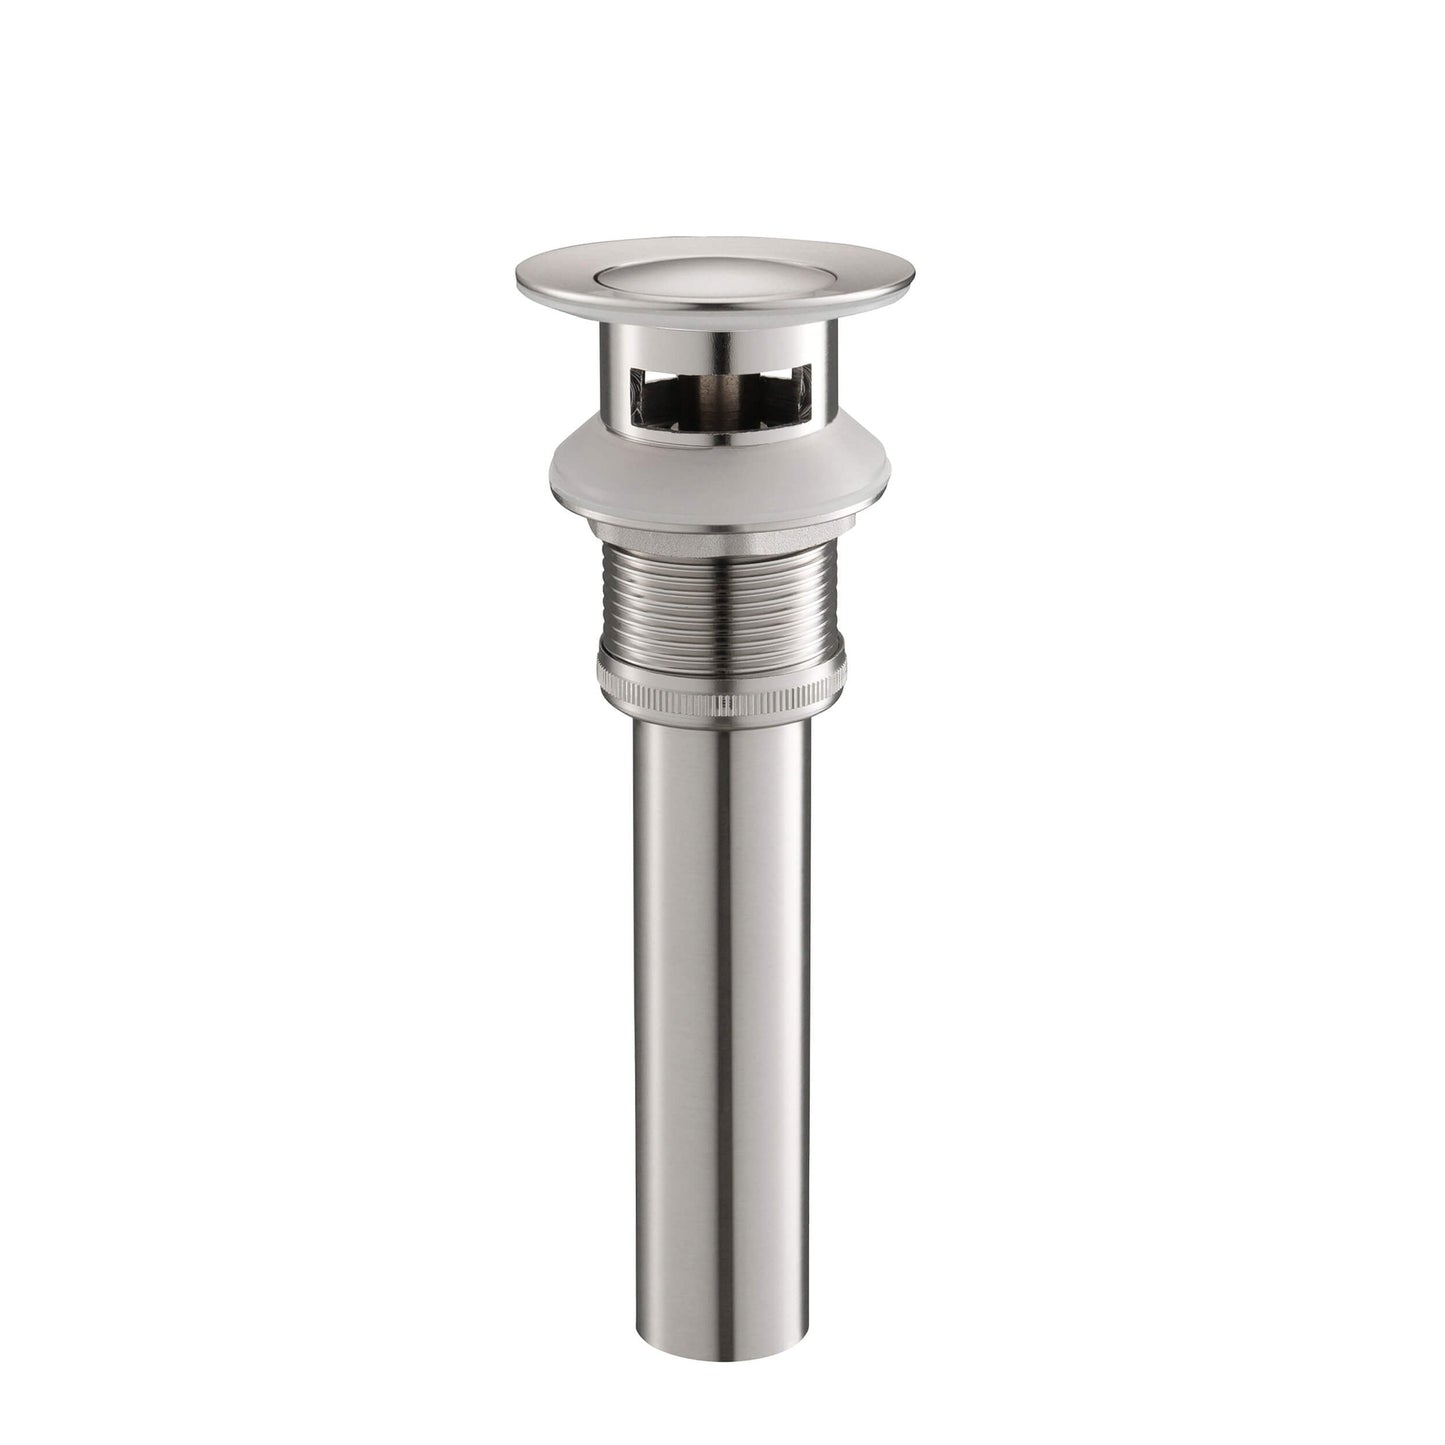 KIBI Brass Bathroom Sink Pop-Up Drain Stopper Small Cover With Overflow in Brushed Nickel Finish